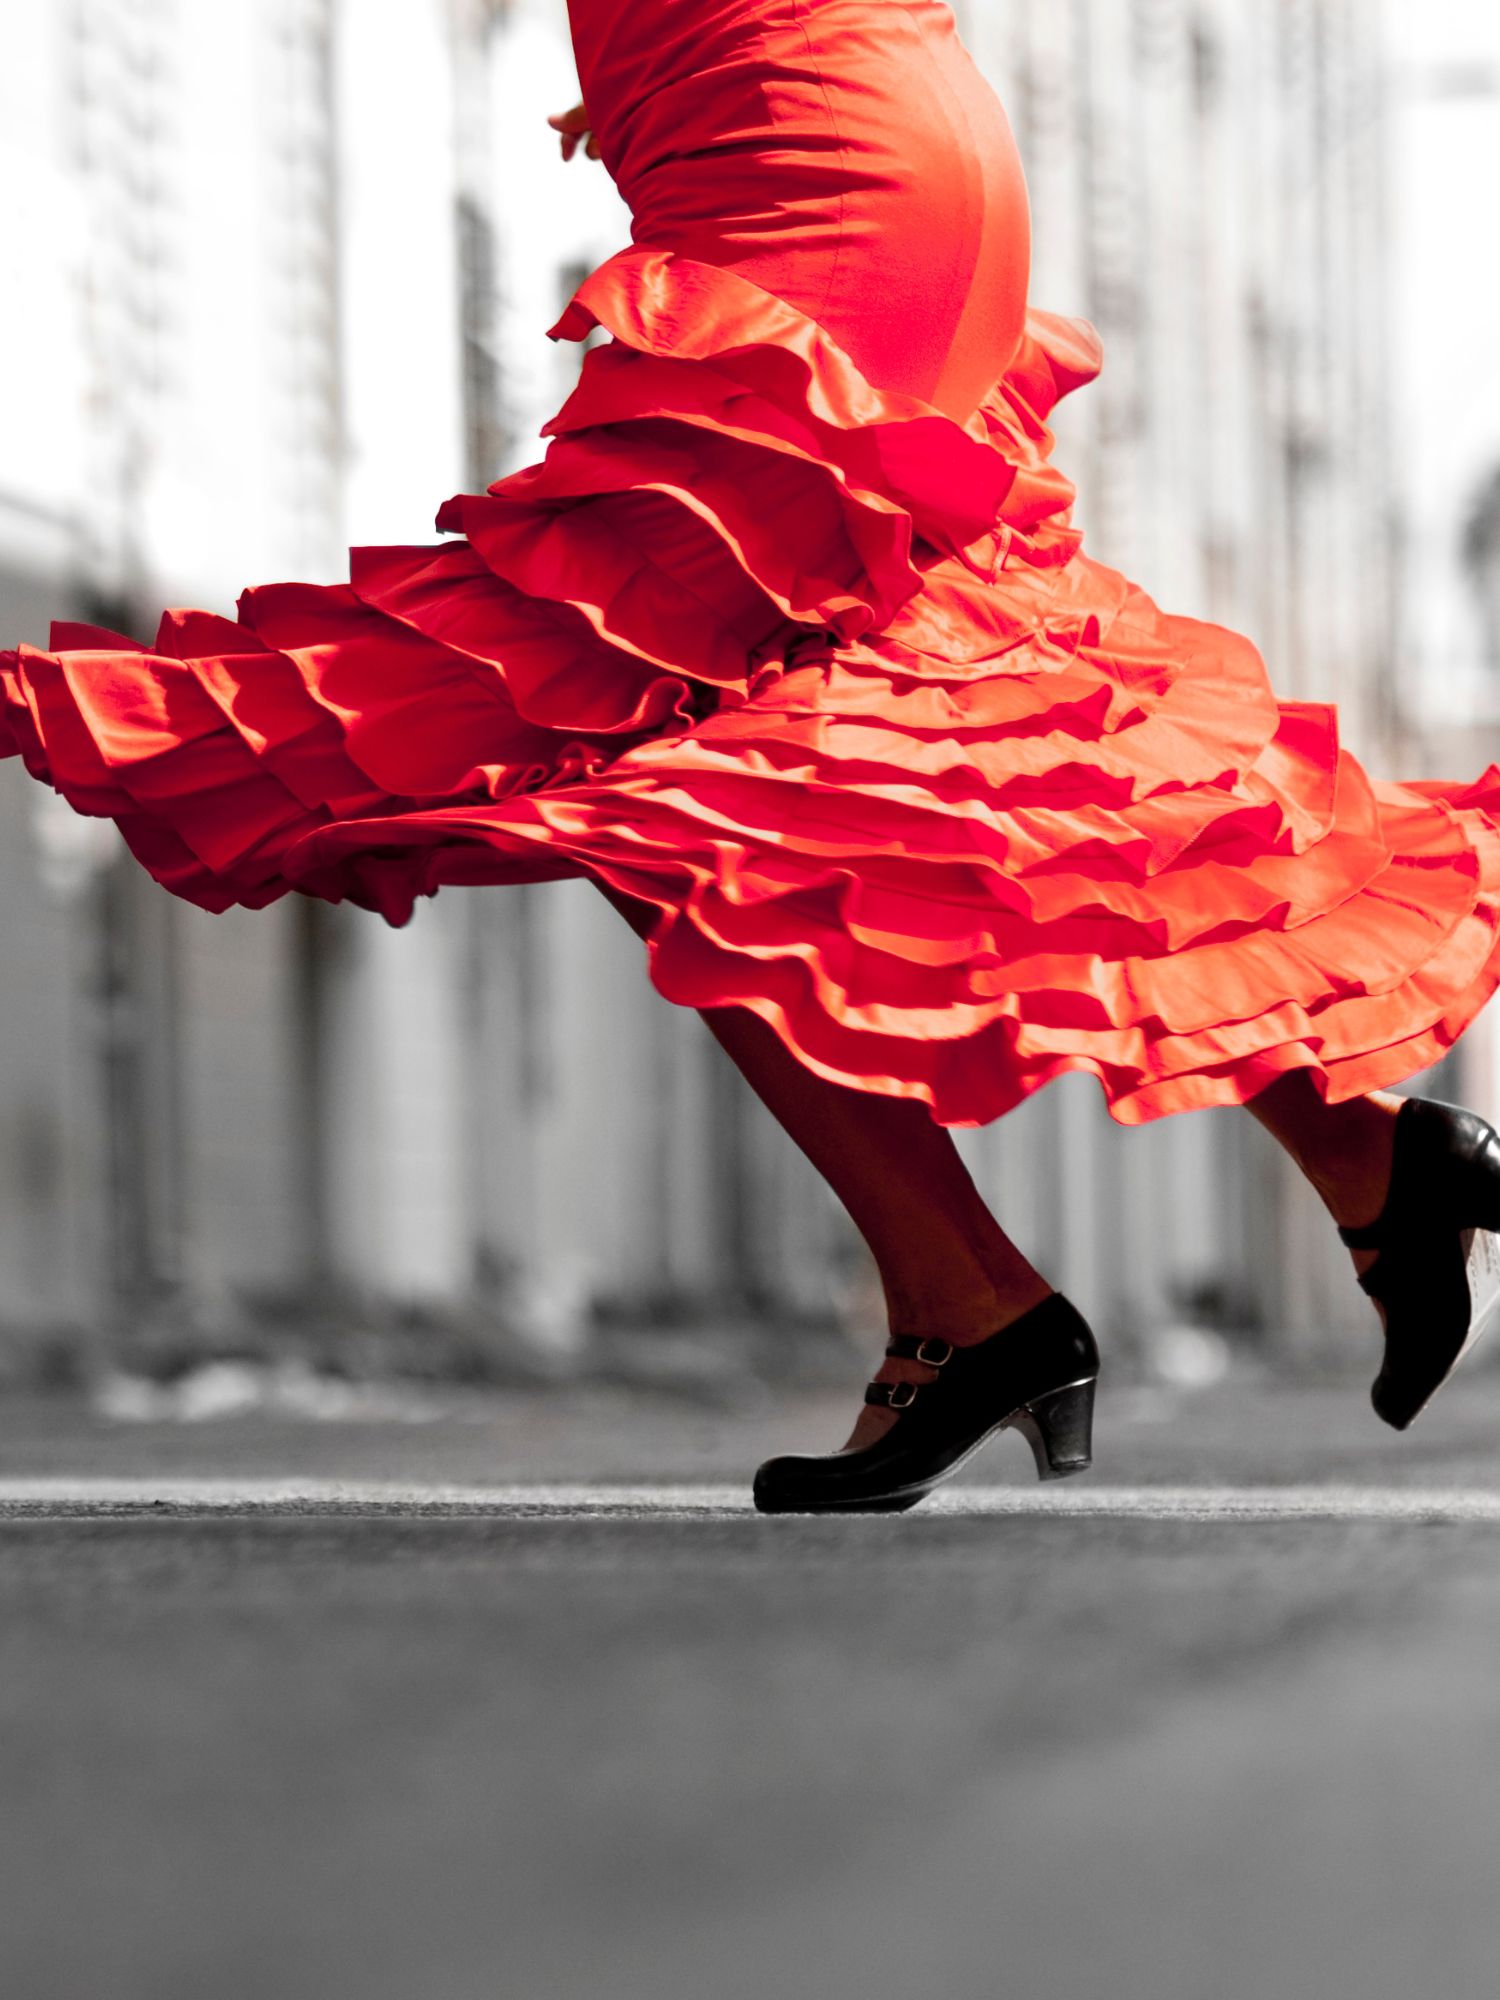 Ana Gollega Flamenco dancer. Occupational therapist Propel Physiotherapy.